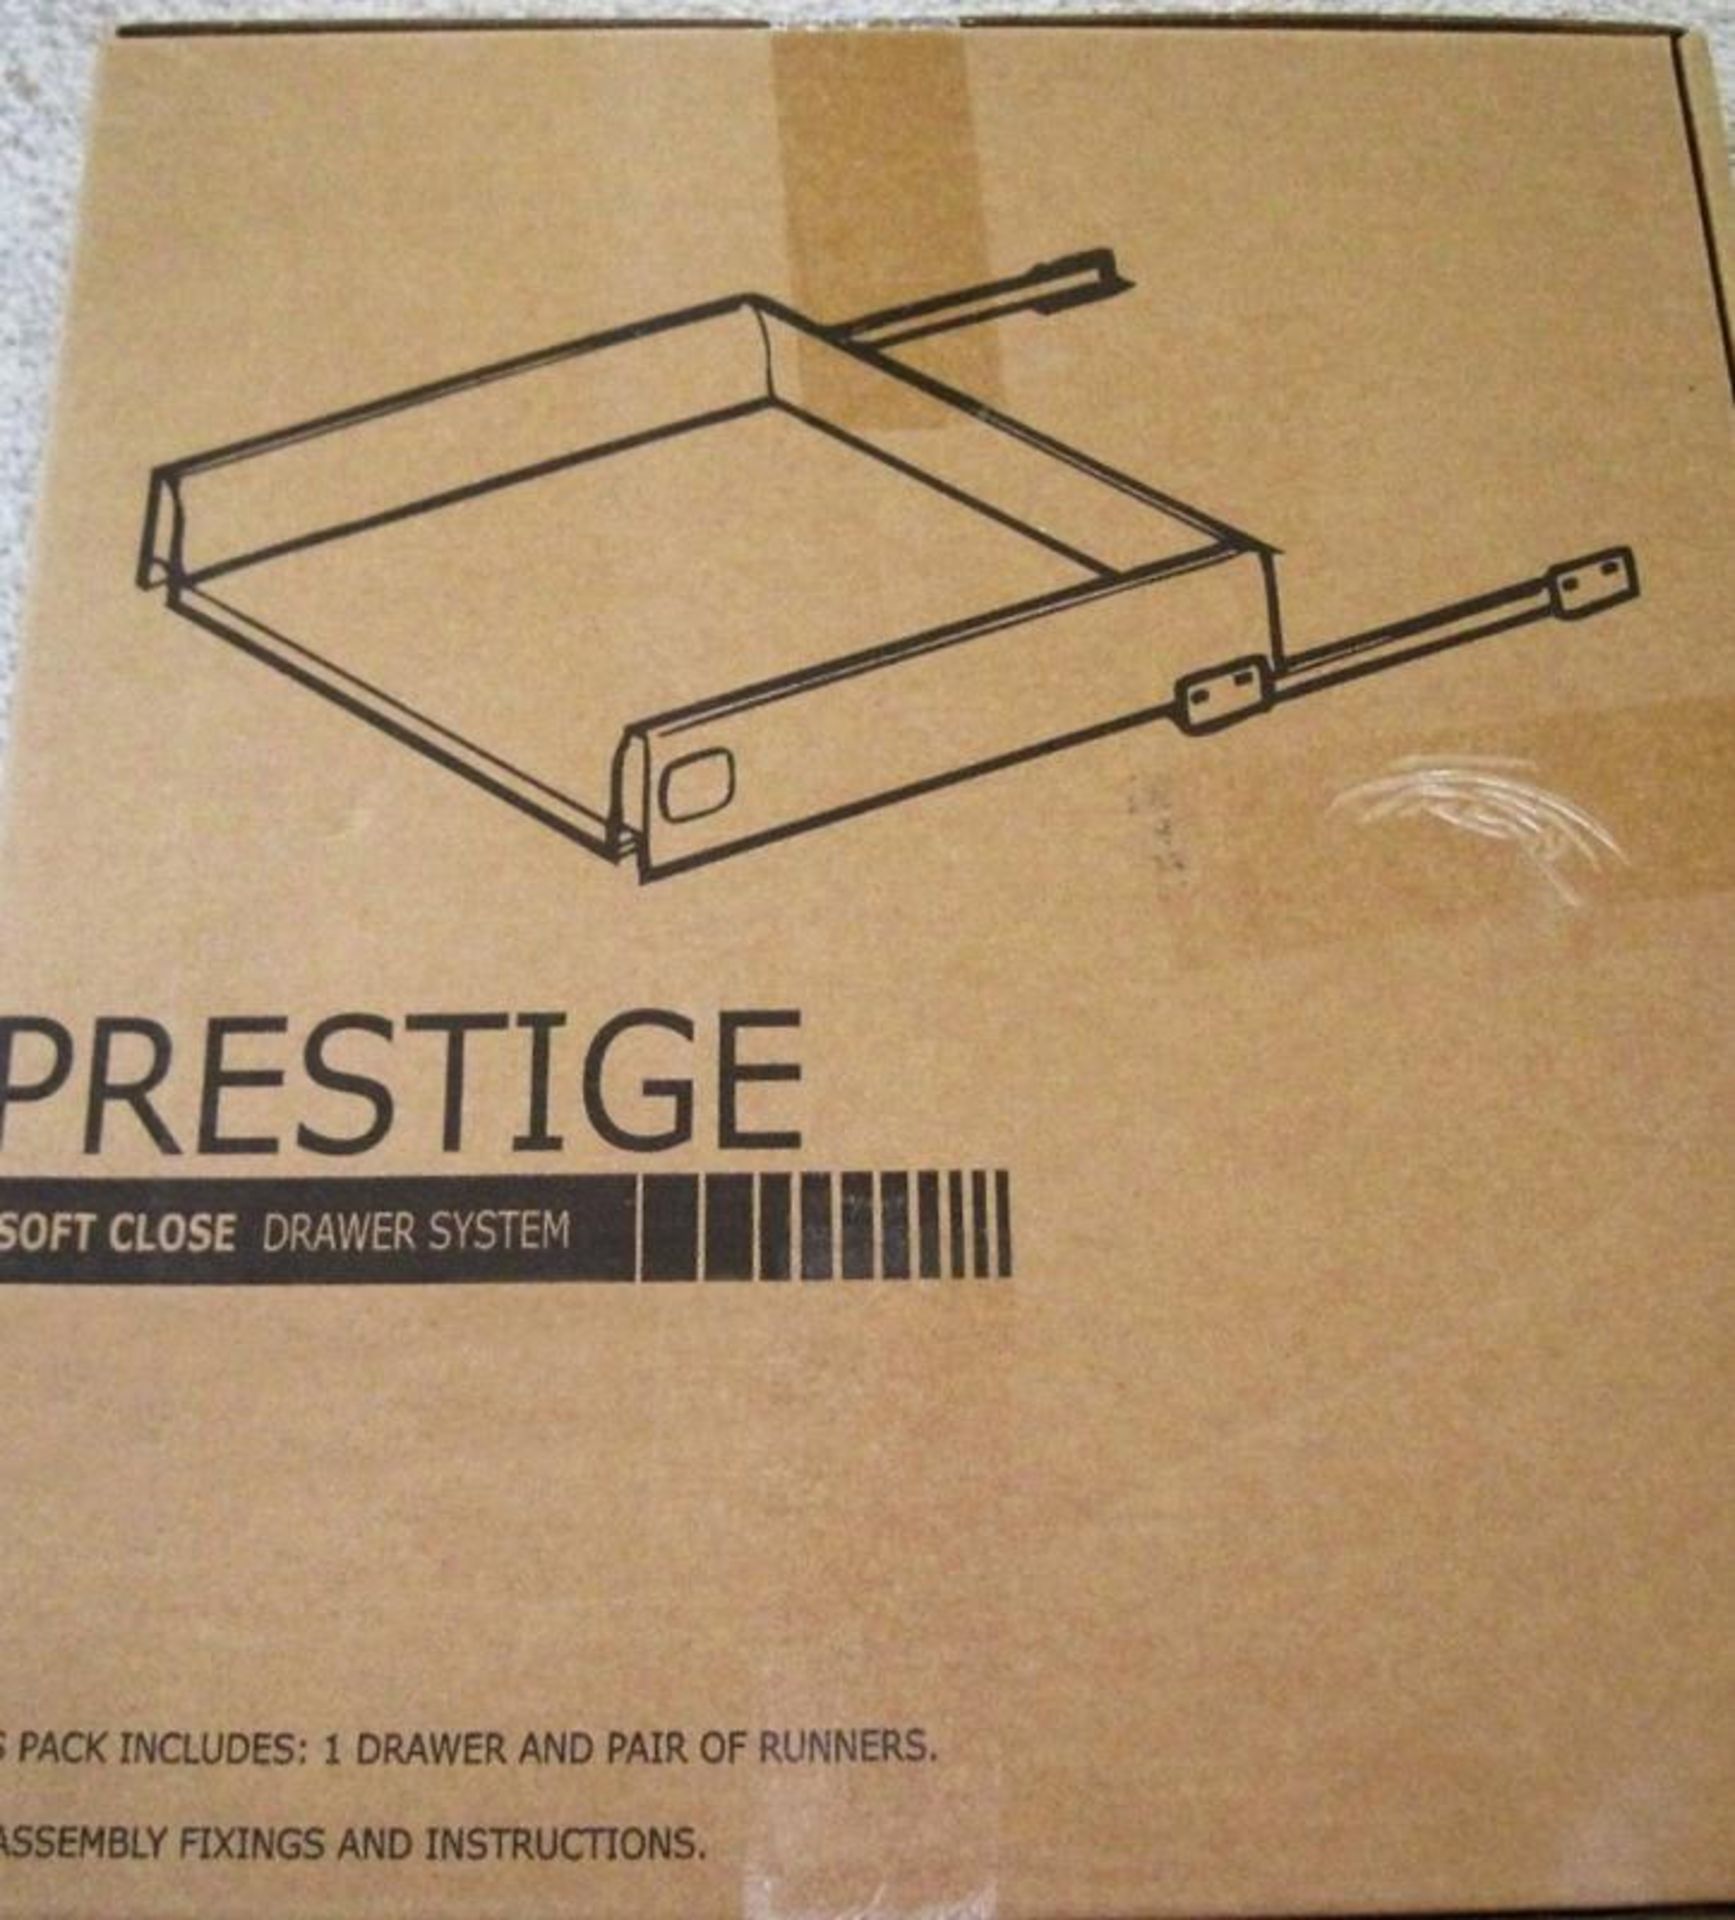 3 x 400mm Soft Close Kitchen Drawer Packs - B&Q Prestige Trade - Brand New Stock - Features - Image 3 of 4